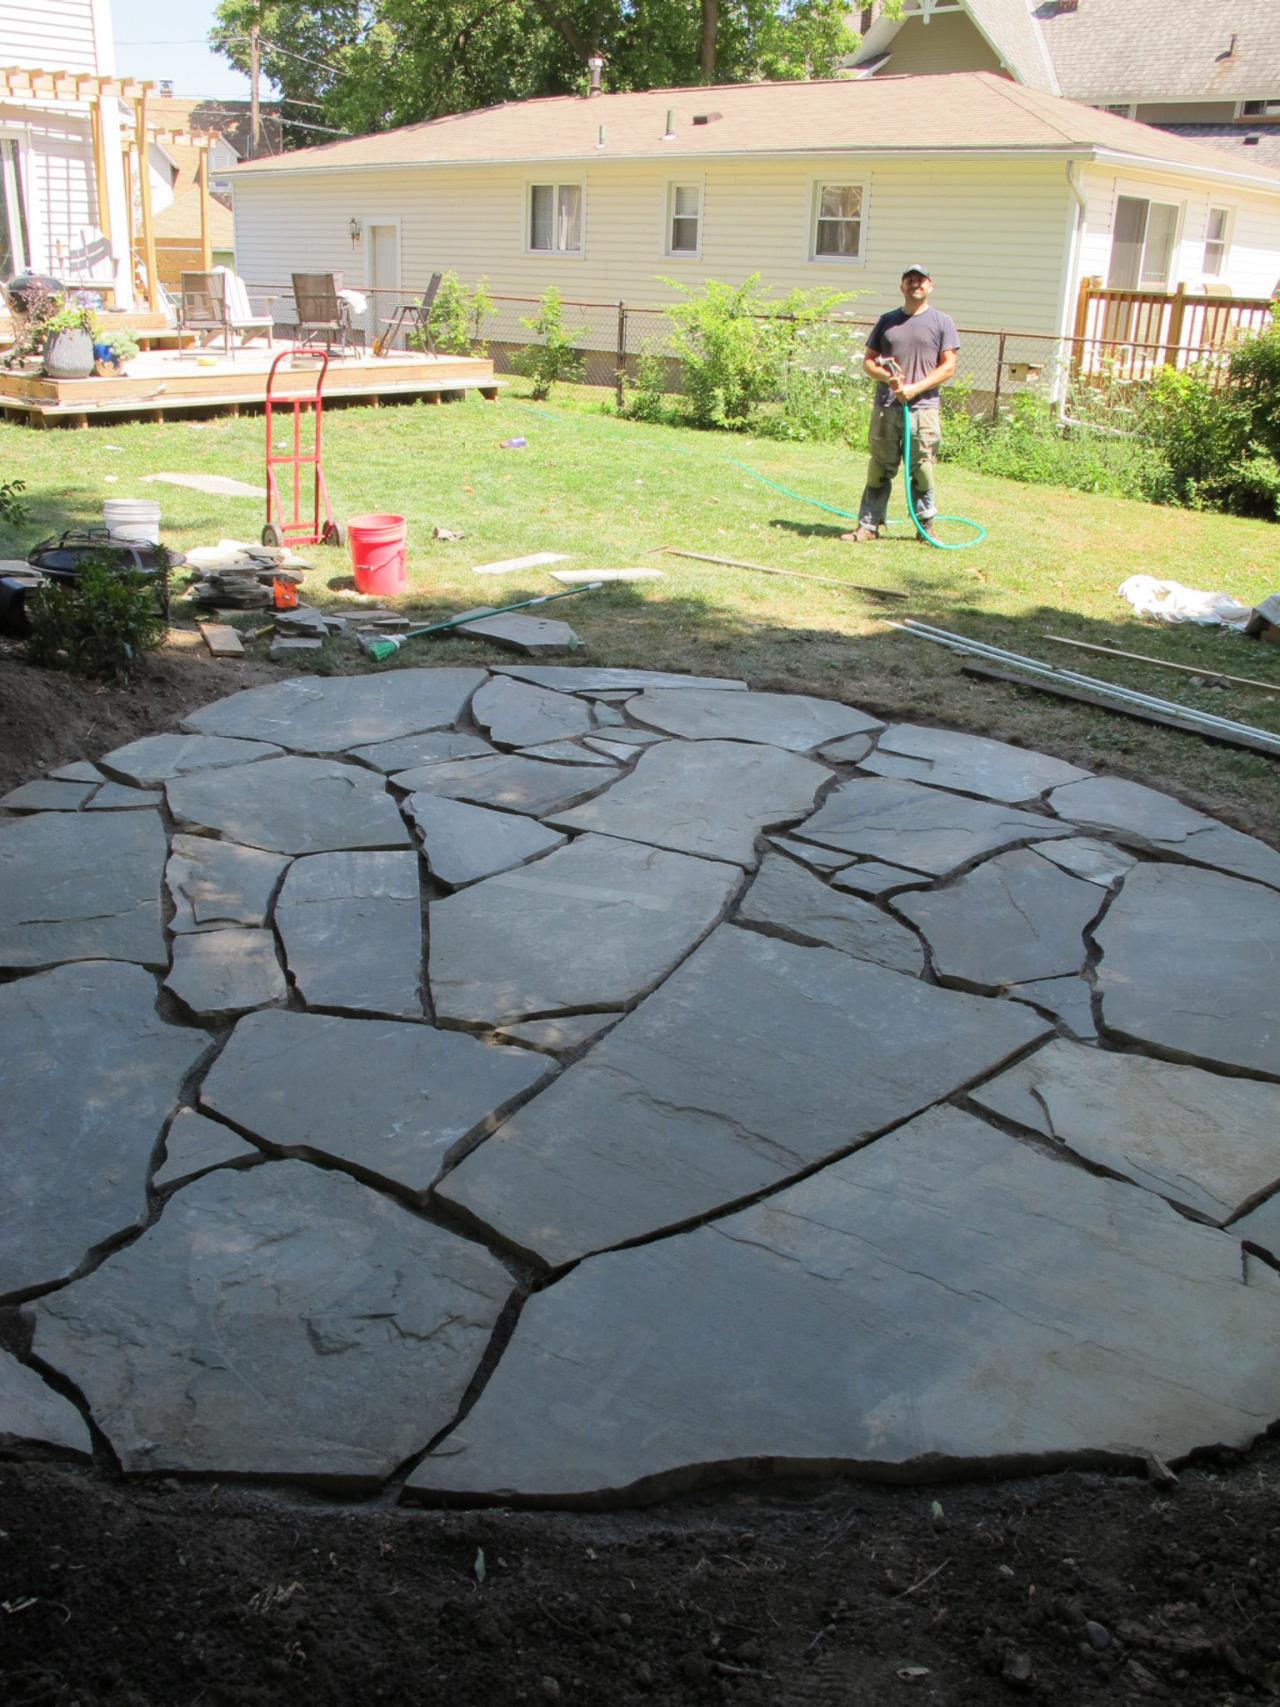 how to install a flagstone patio with irregular stones | diy network blog: STALZHF